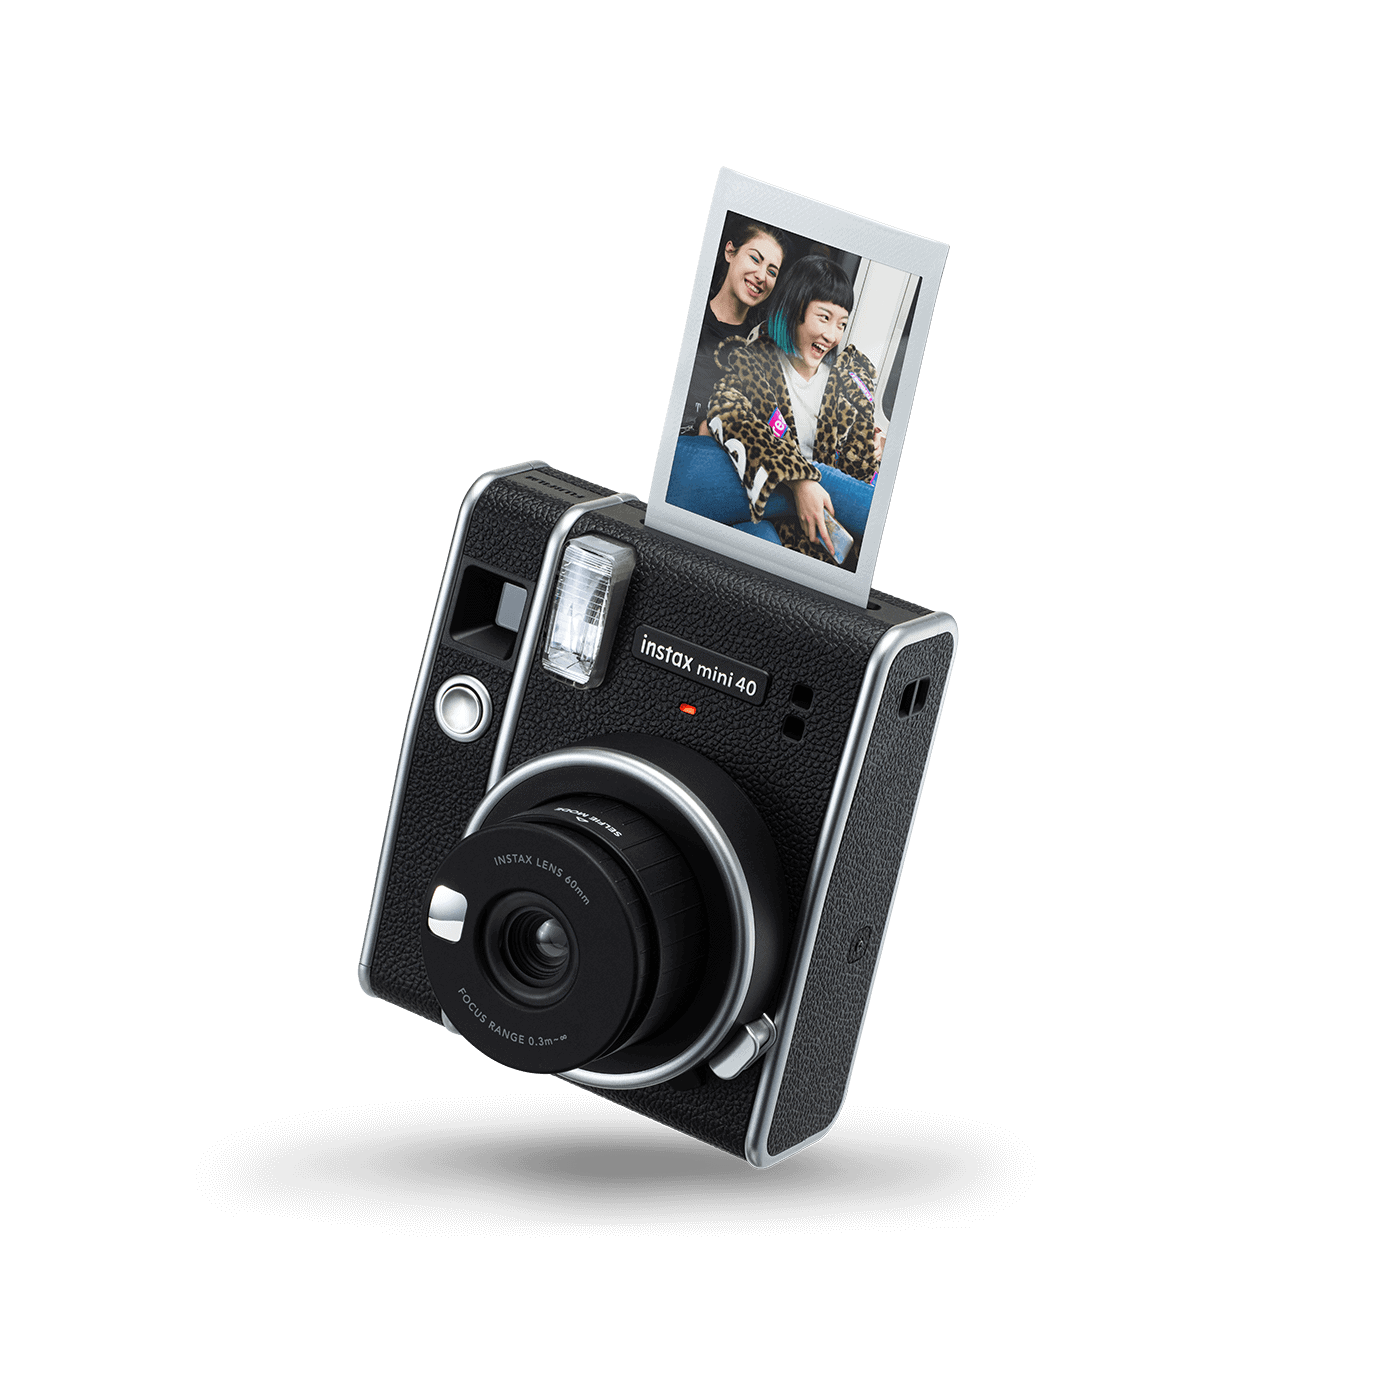 Fujifilm Instax Mini 40 review: A fun, retro-styled point-and